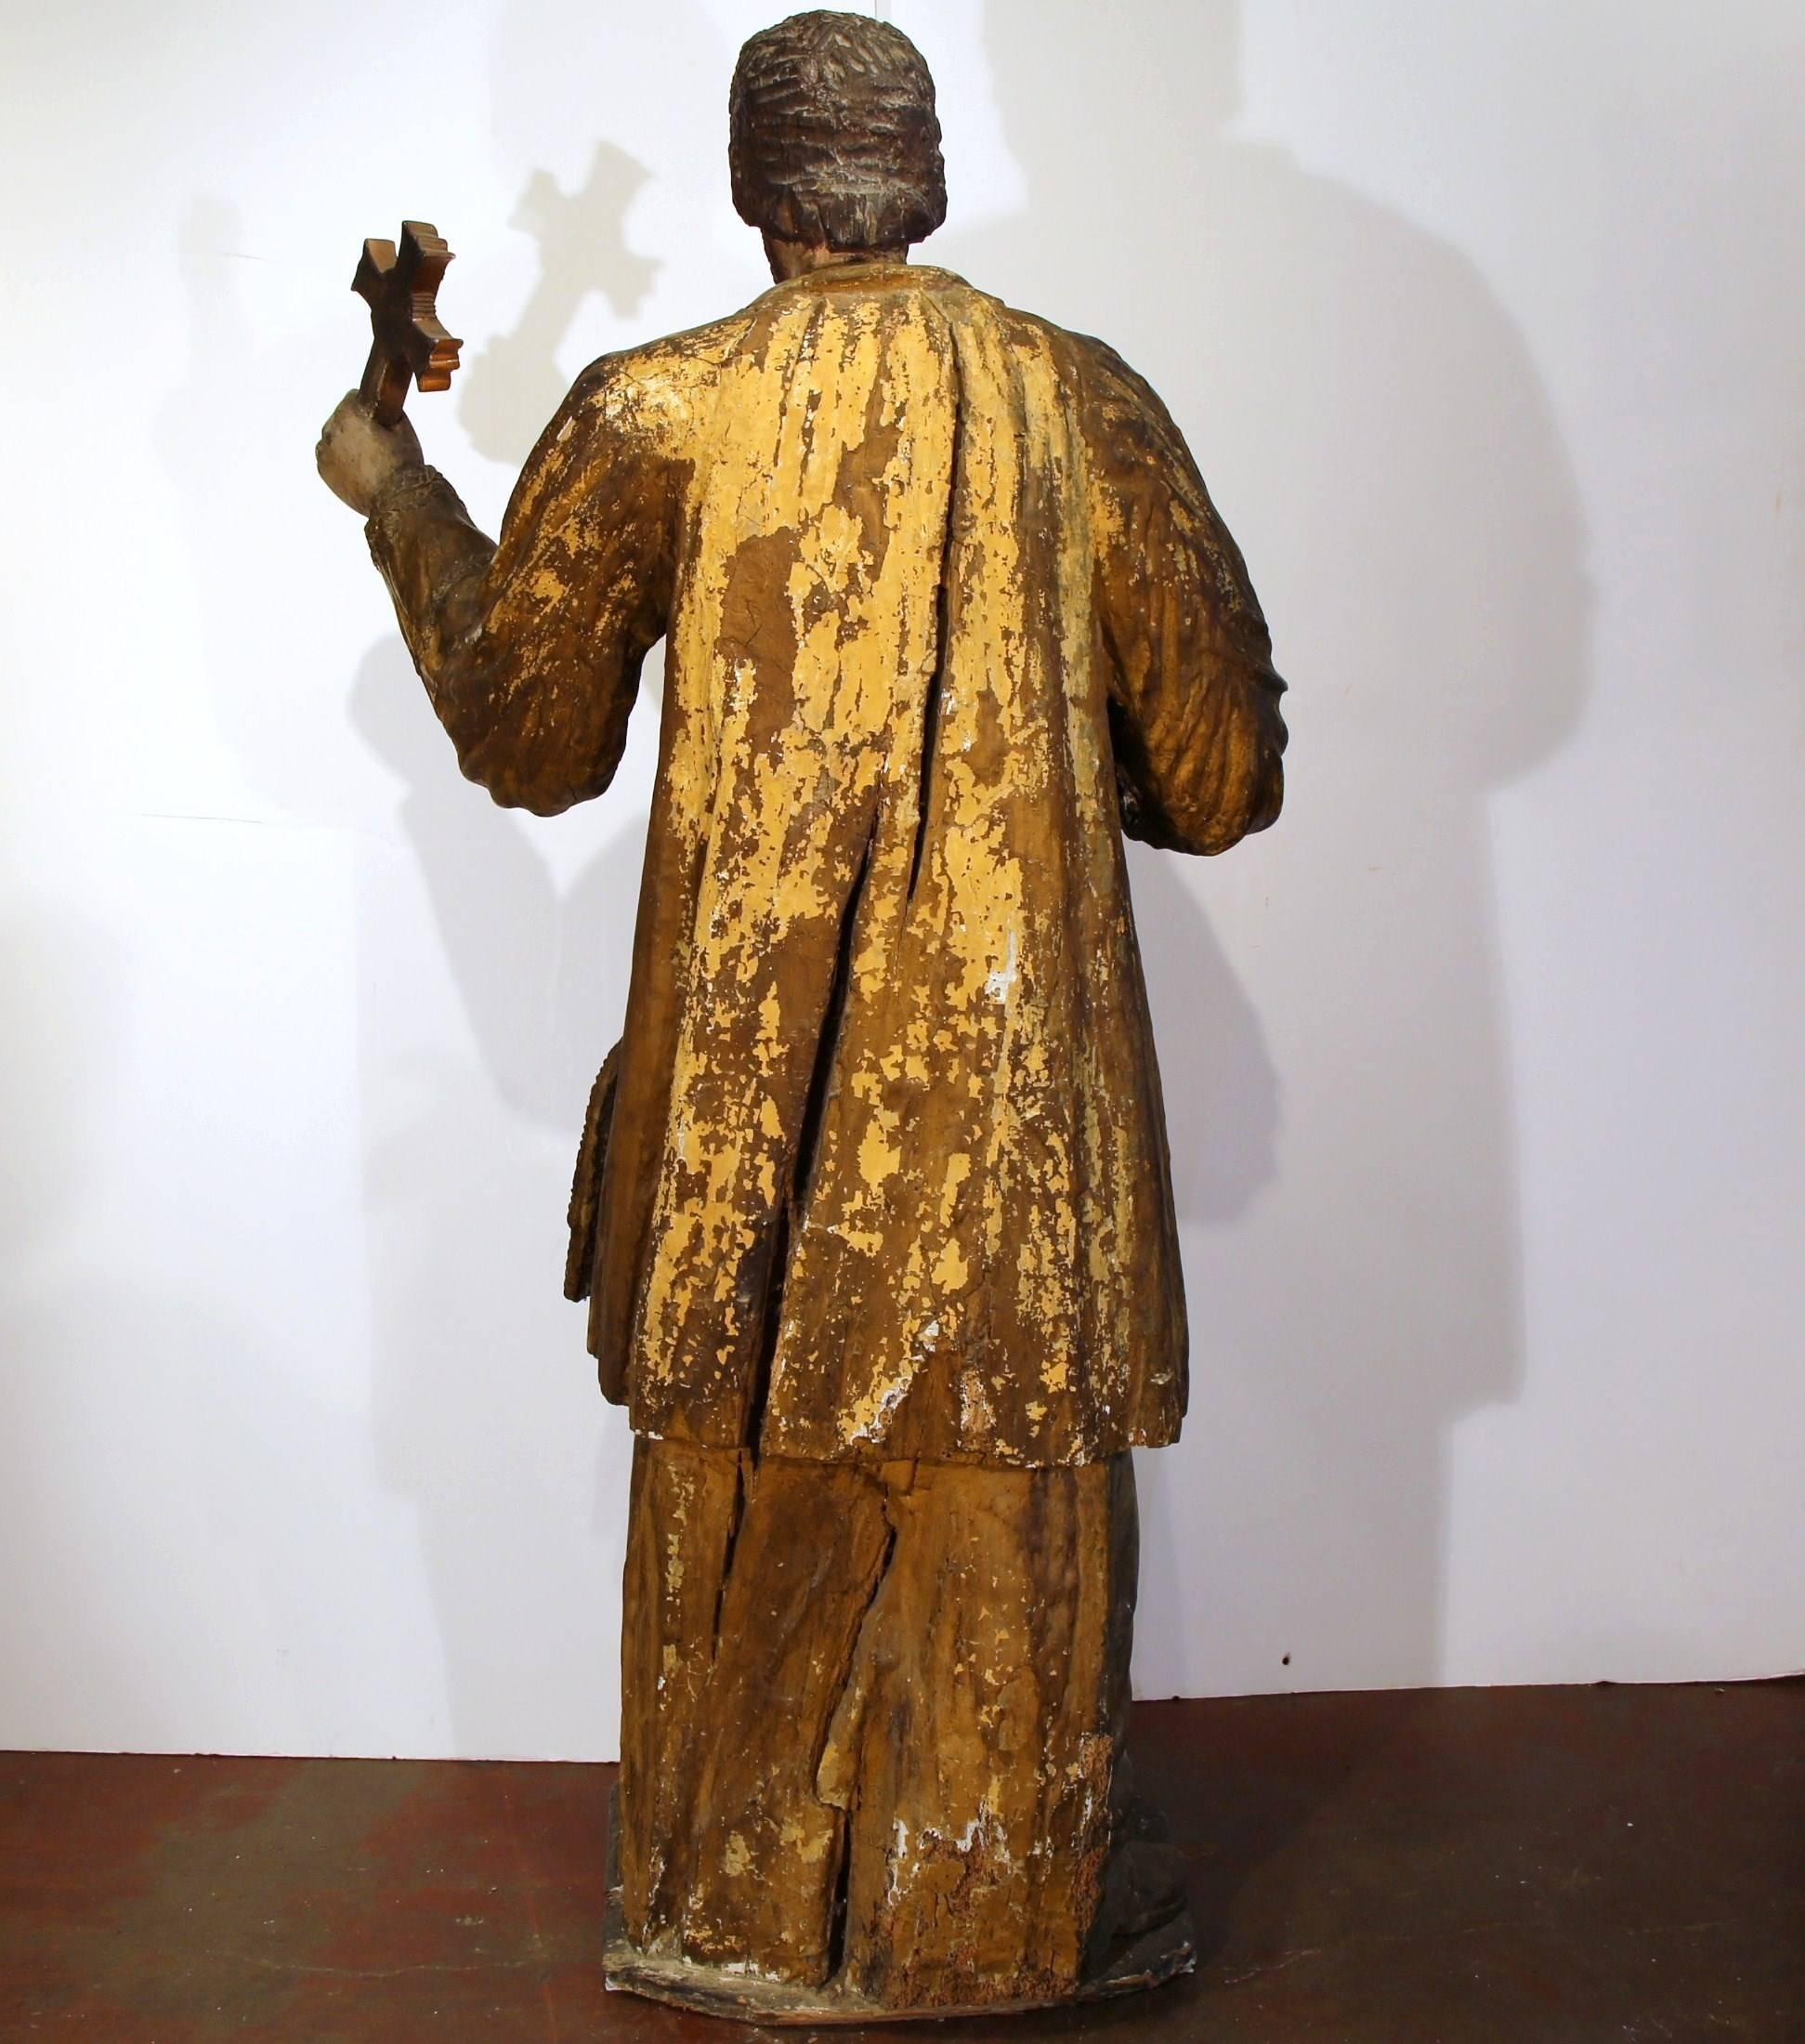 Giltwood 18th Century Spanish Carved Statue of Saint Francis-Xavier with Gold Leaf Finish